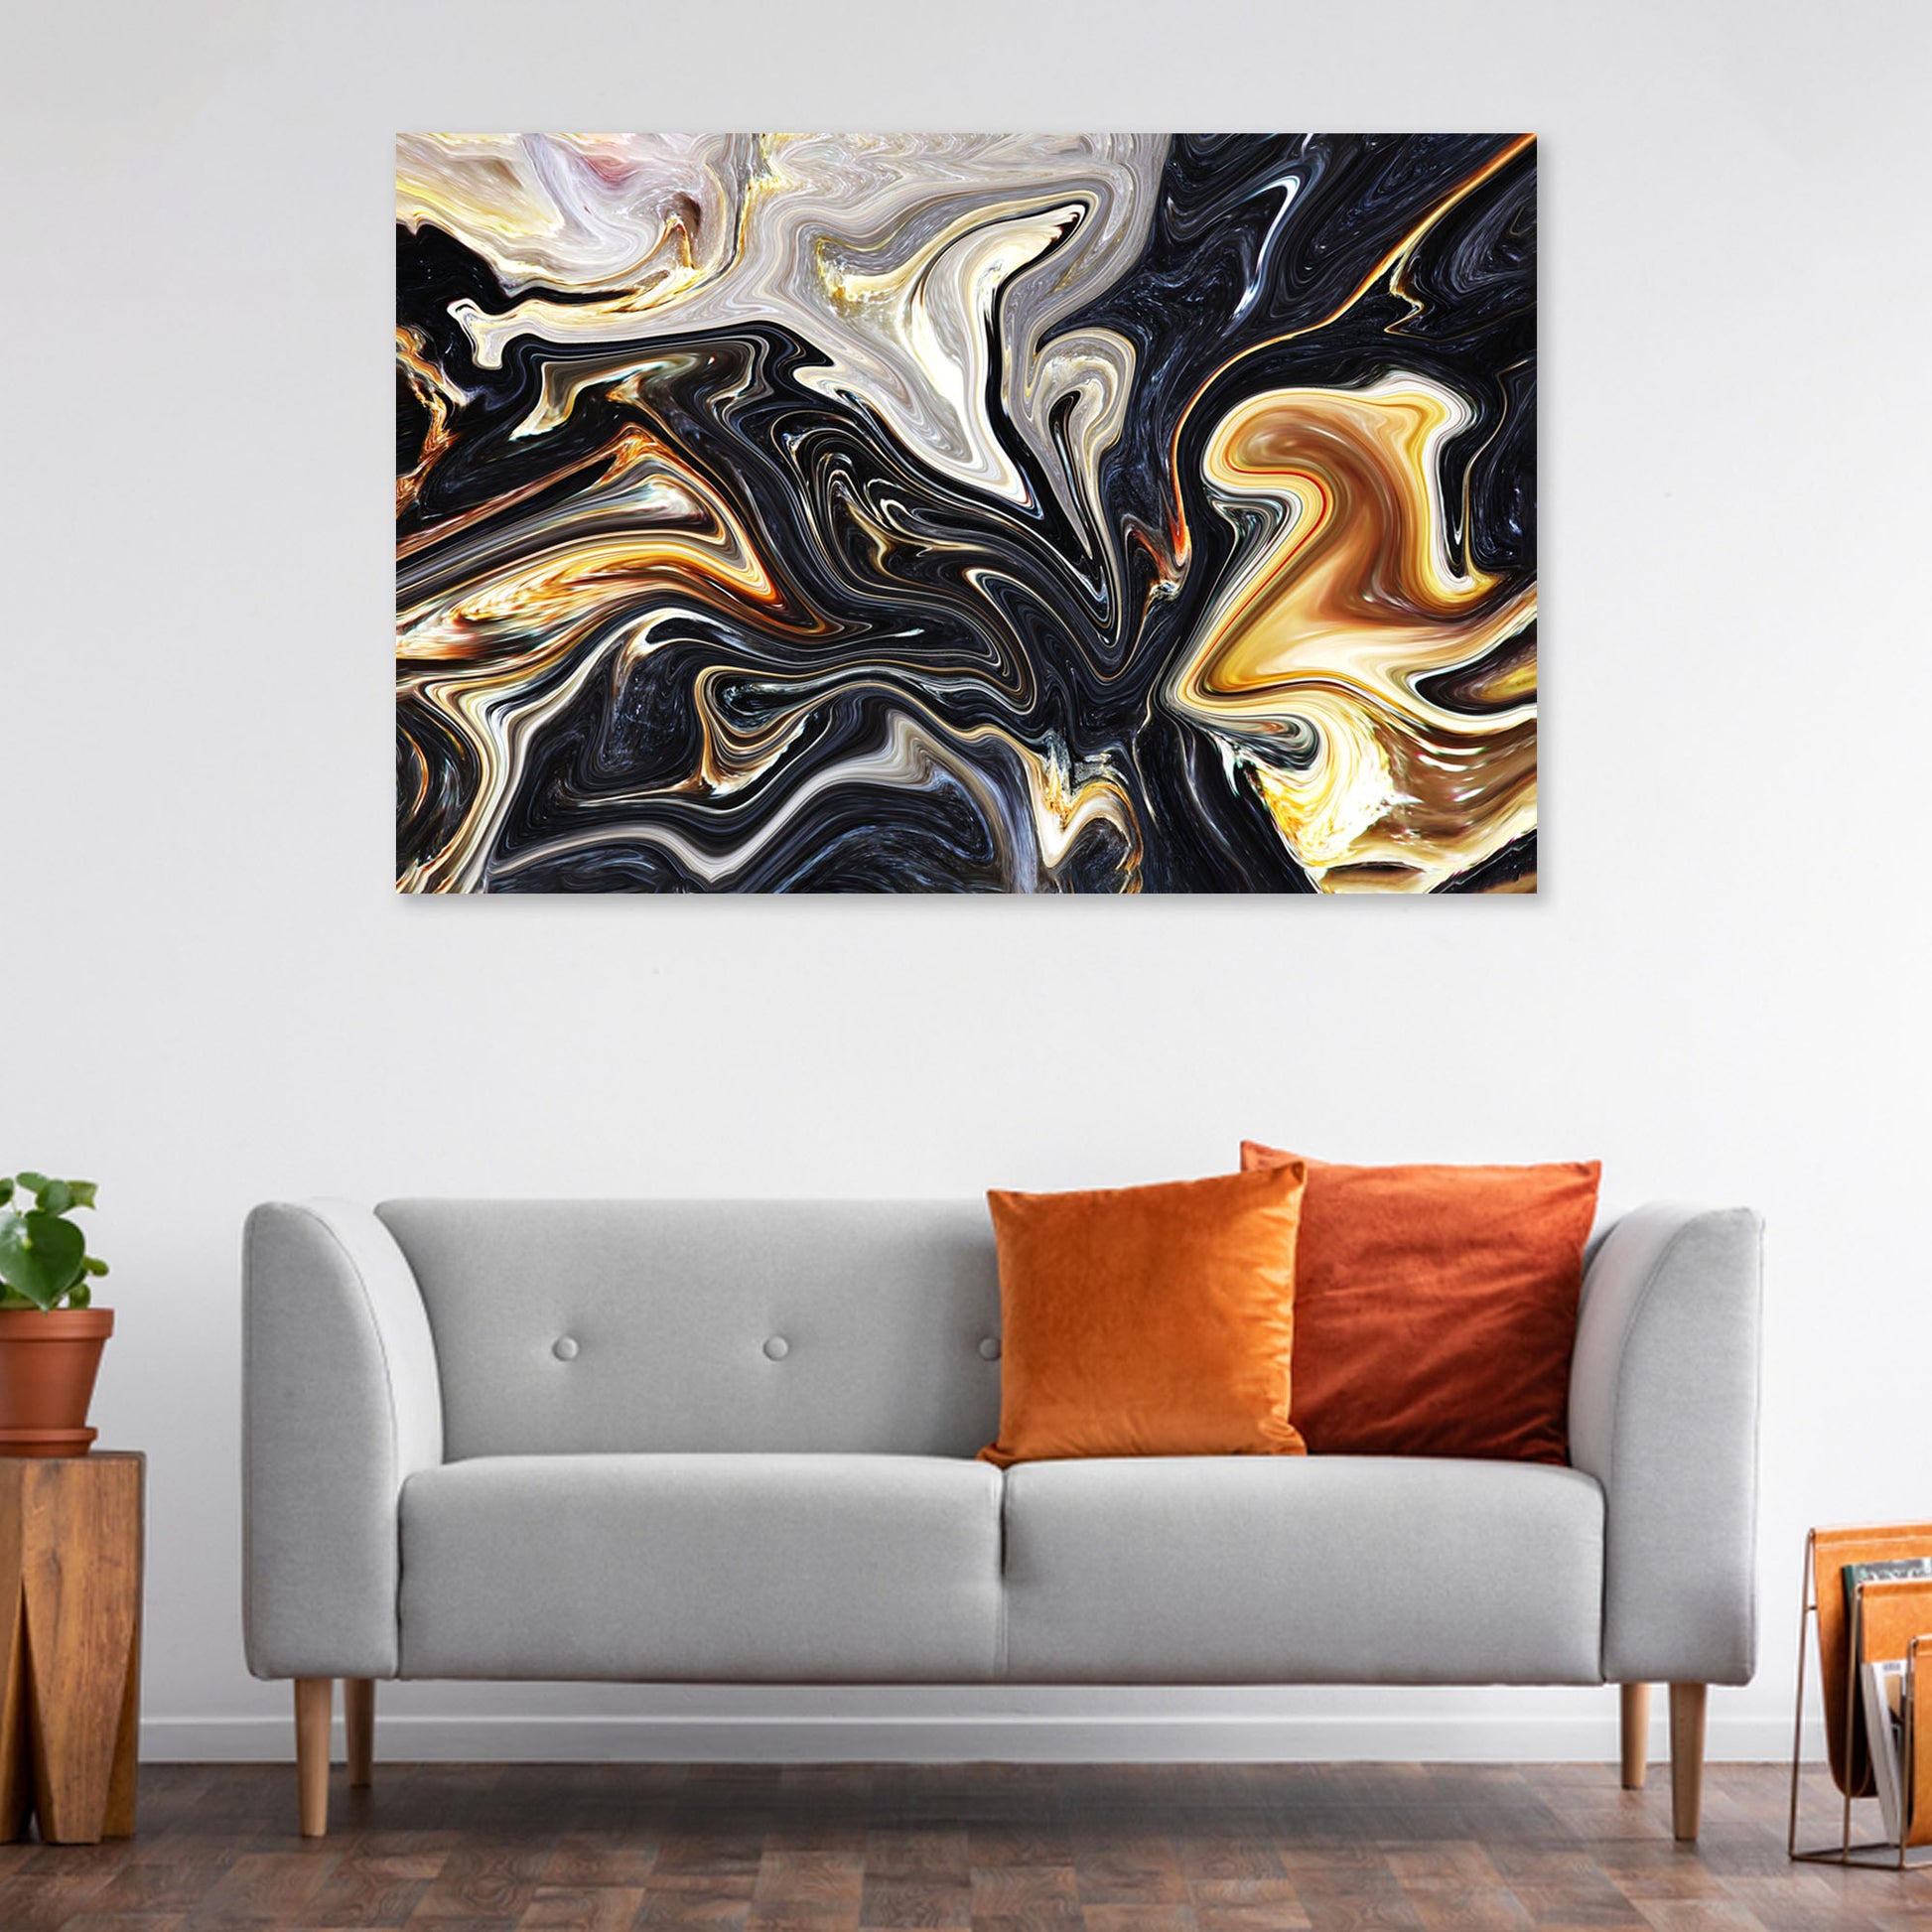 Black Gold Mix Abstract Canvas Wall Art - Image by Tailored Canvases